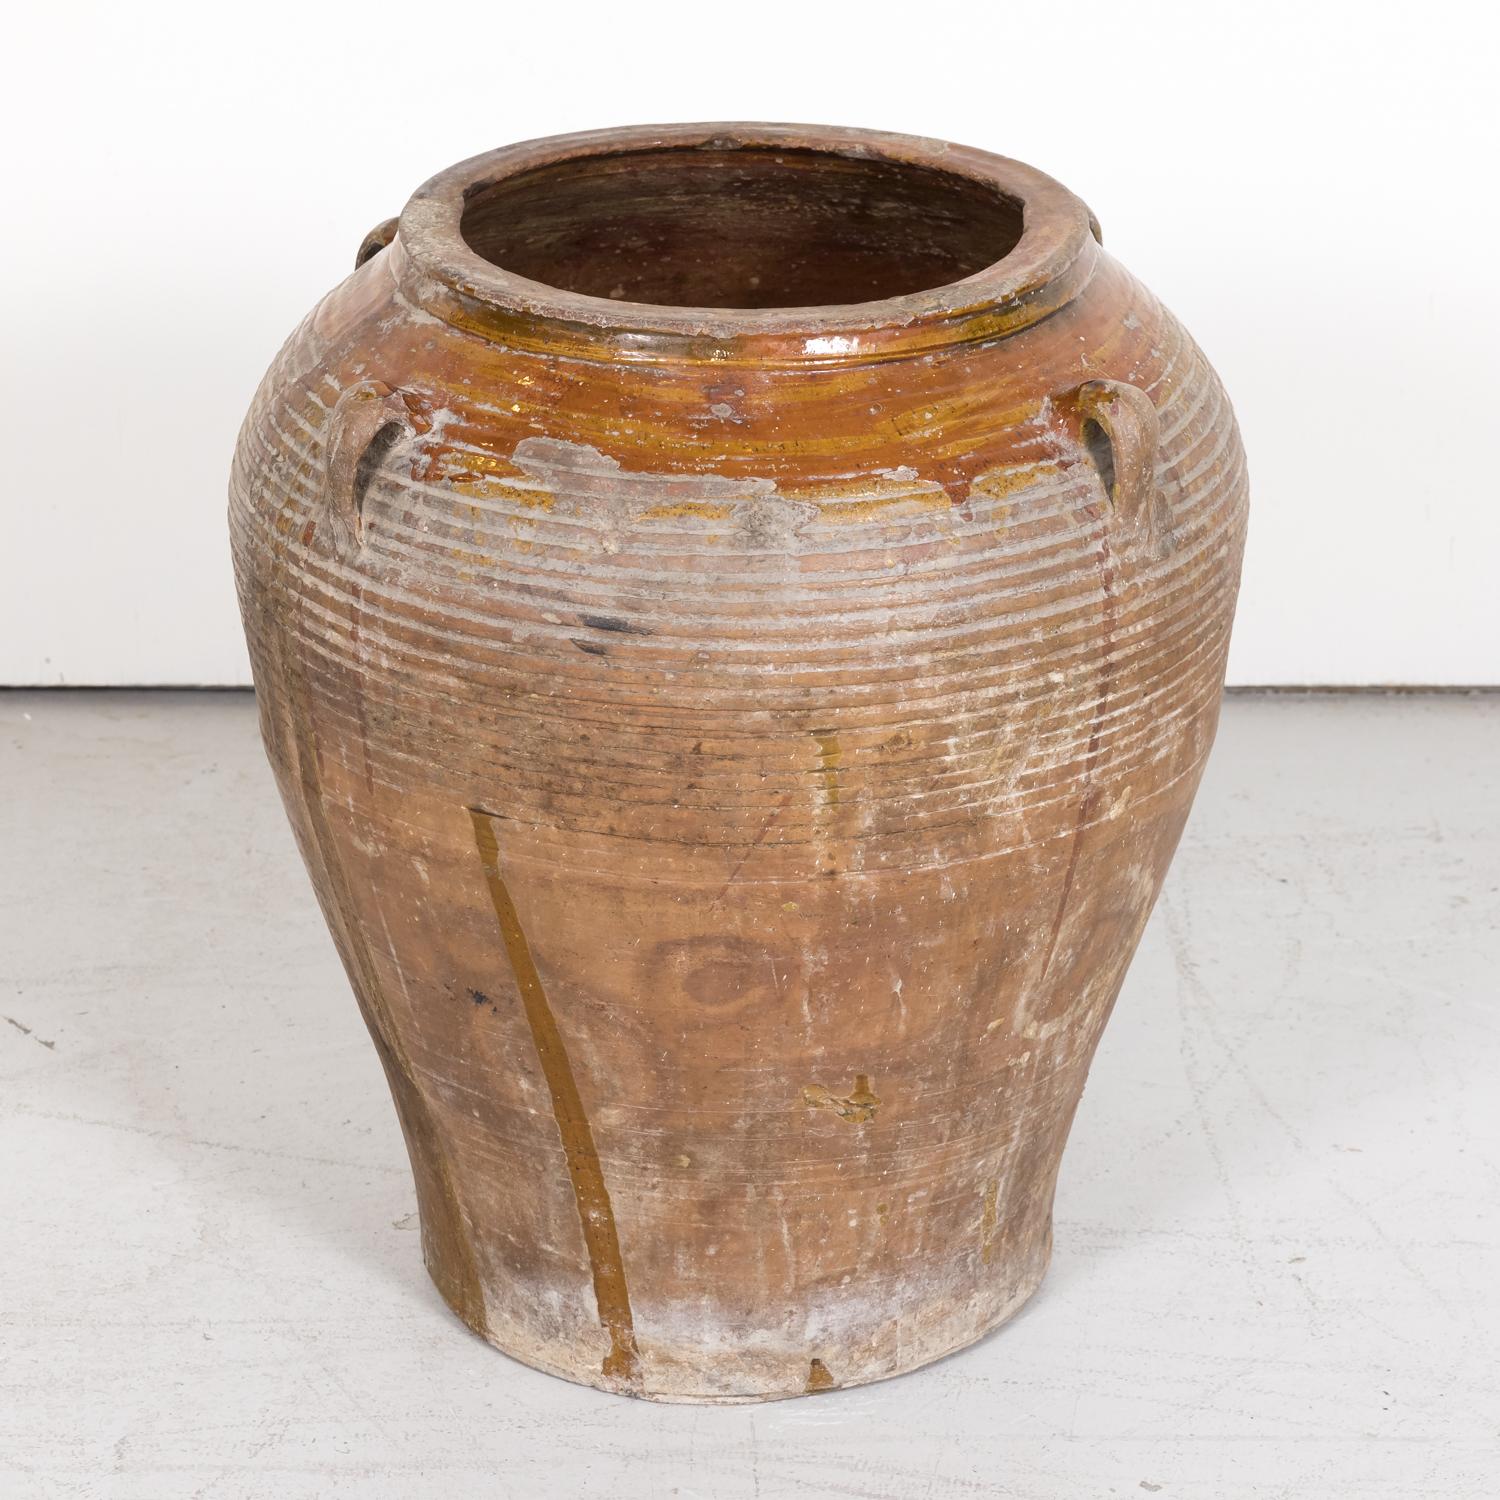 A 19th century traditional antique Spanish terracotta orza or olive jar handmade in the province of Tarragona in Catalonia, circa 1890s, having four handles and an unglazed exterior with circular striations with the neck, rim, and interior glazed a